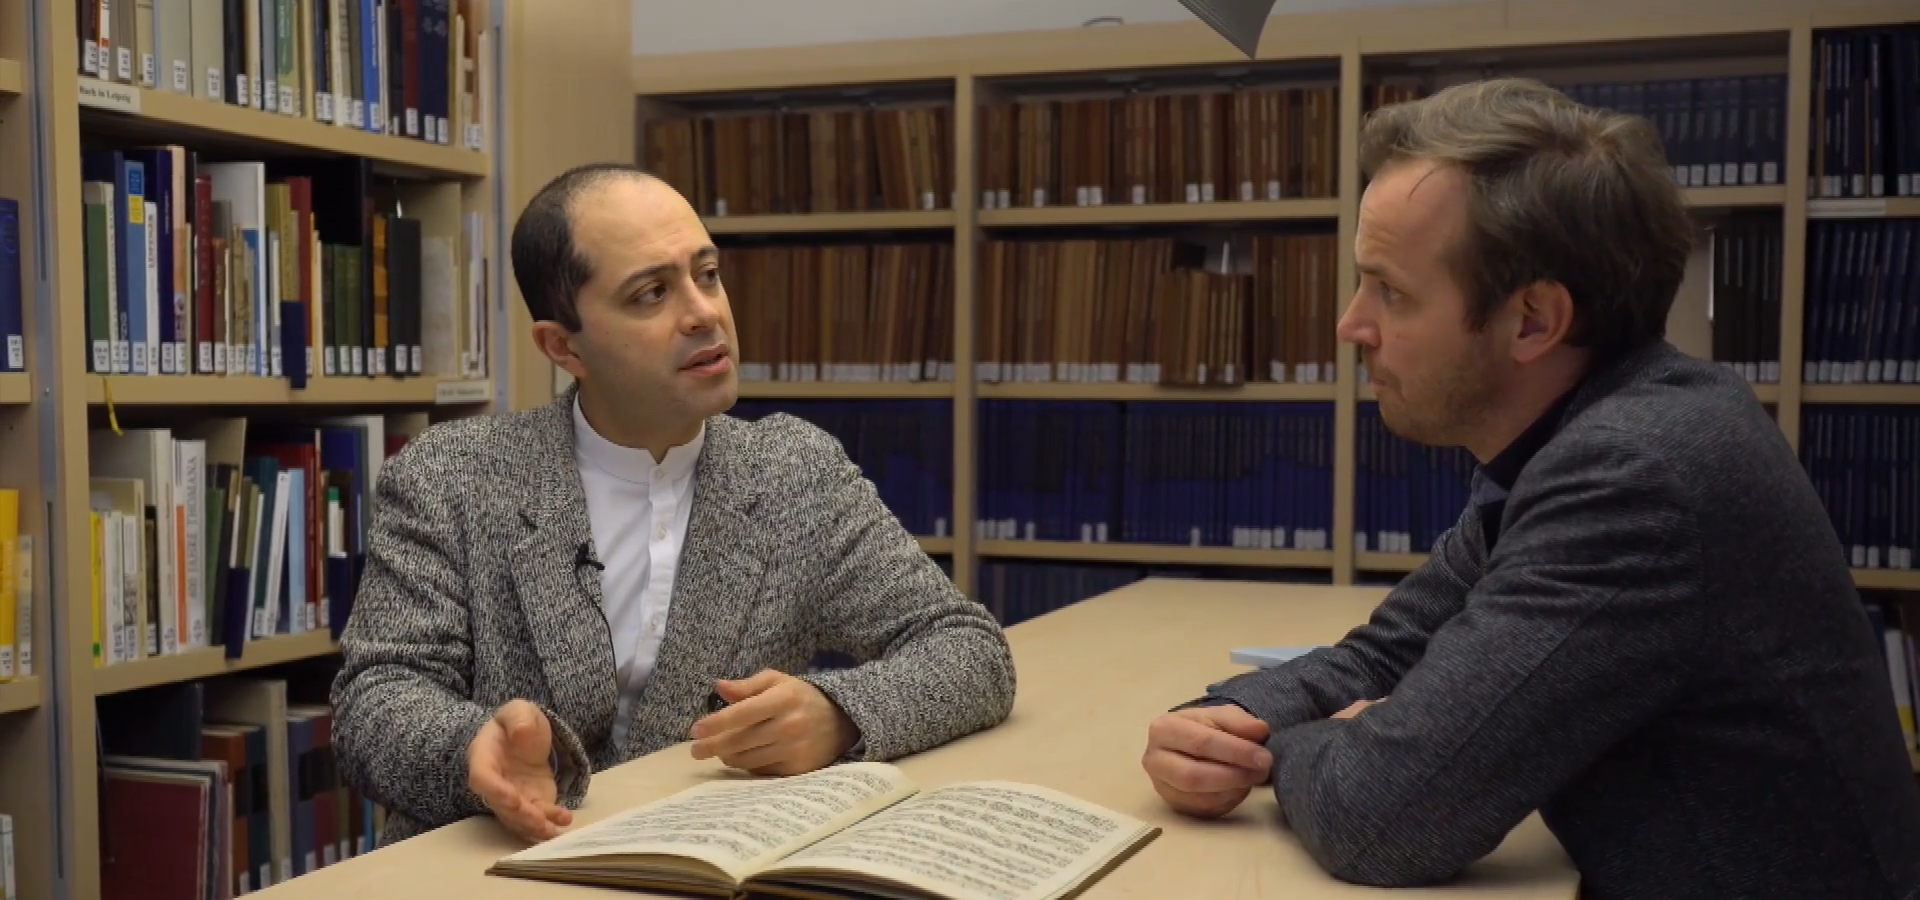 Mahan Esfahani and Michael Maul in Conversation